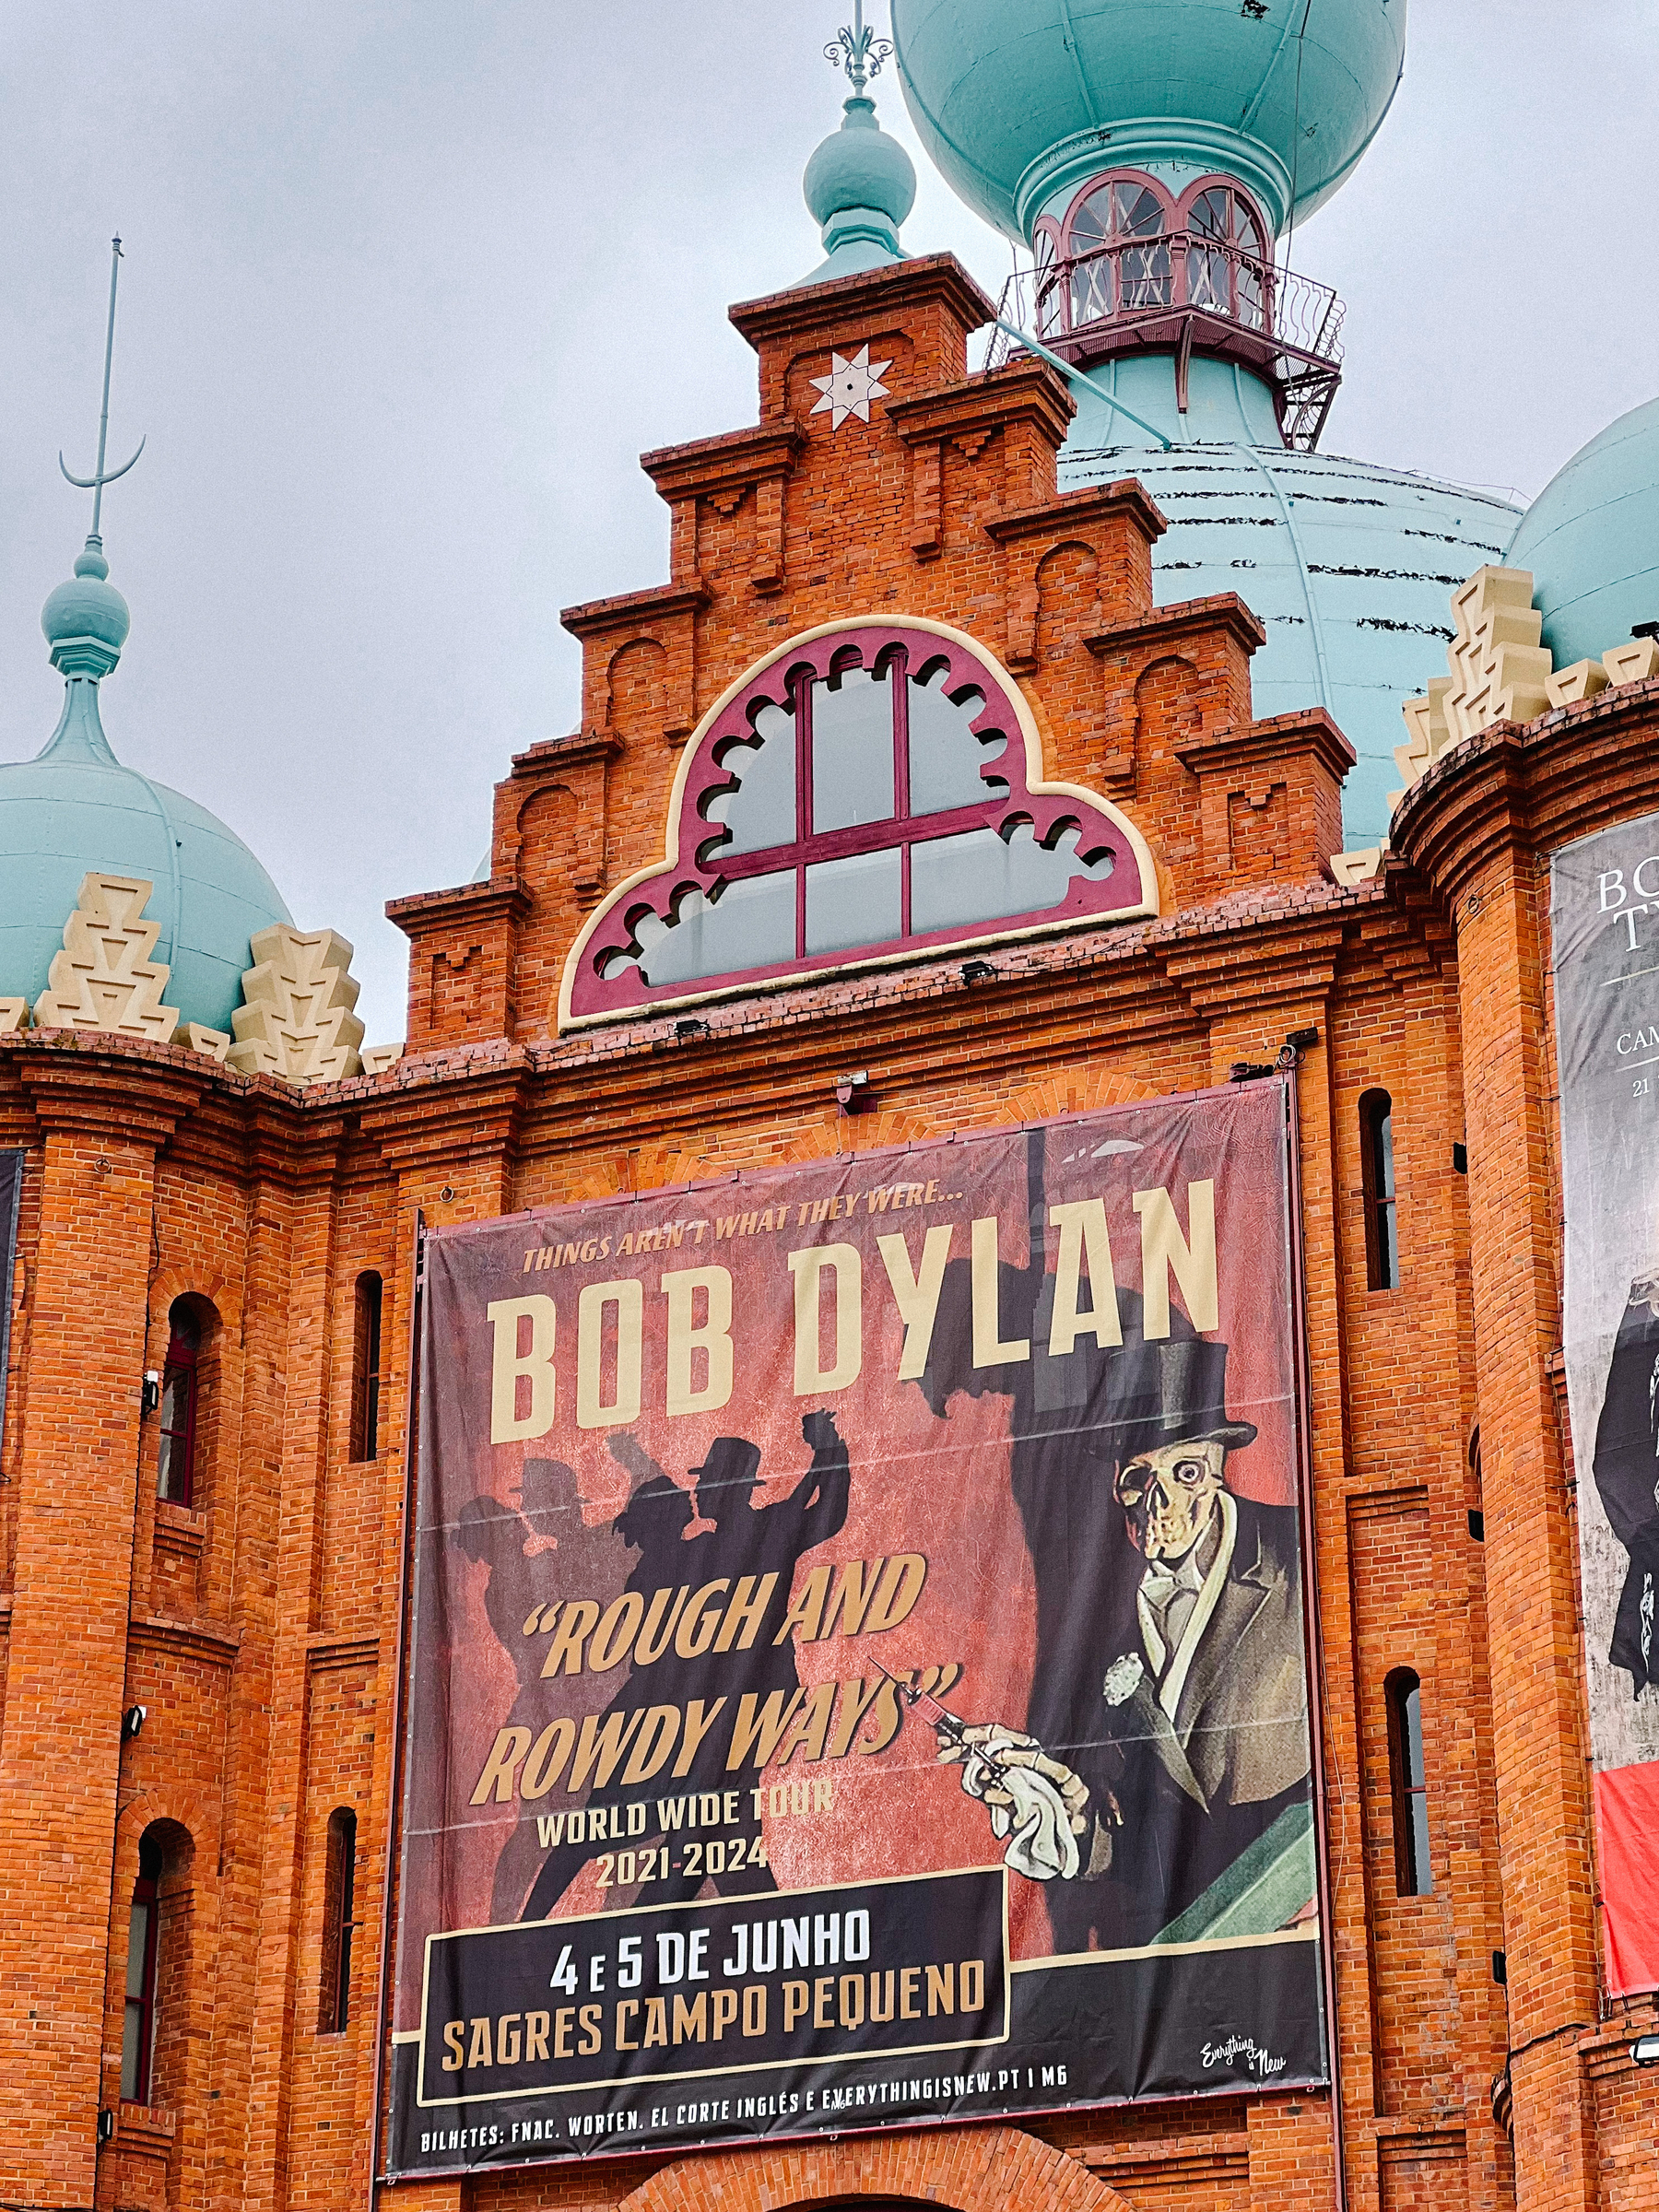 Bob Dylan concert being announced. On a bullring. 